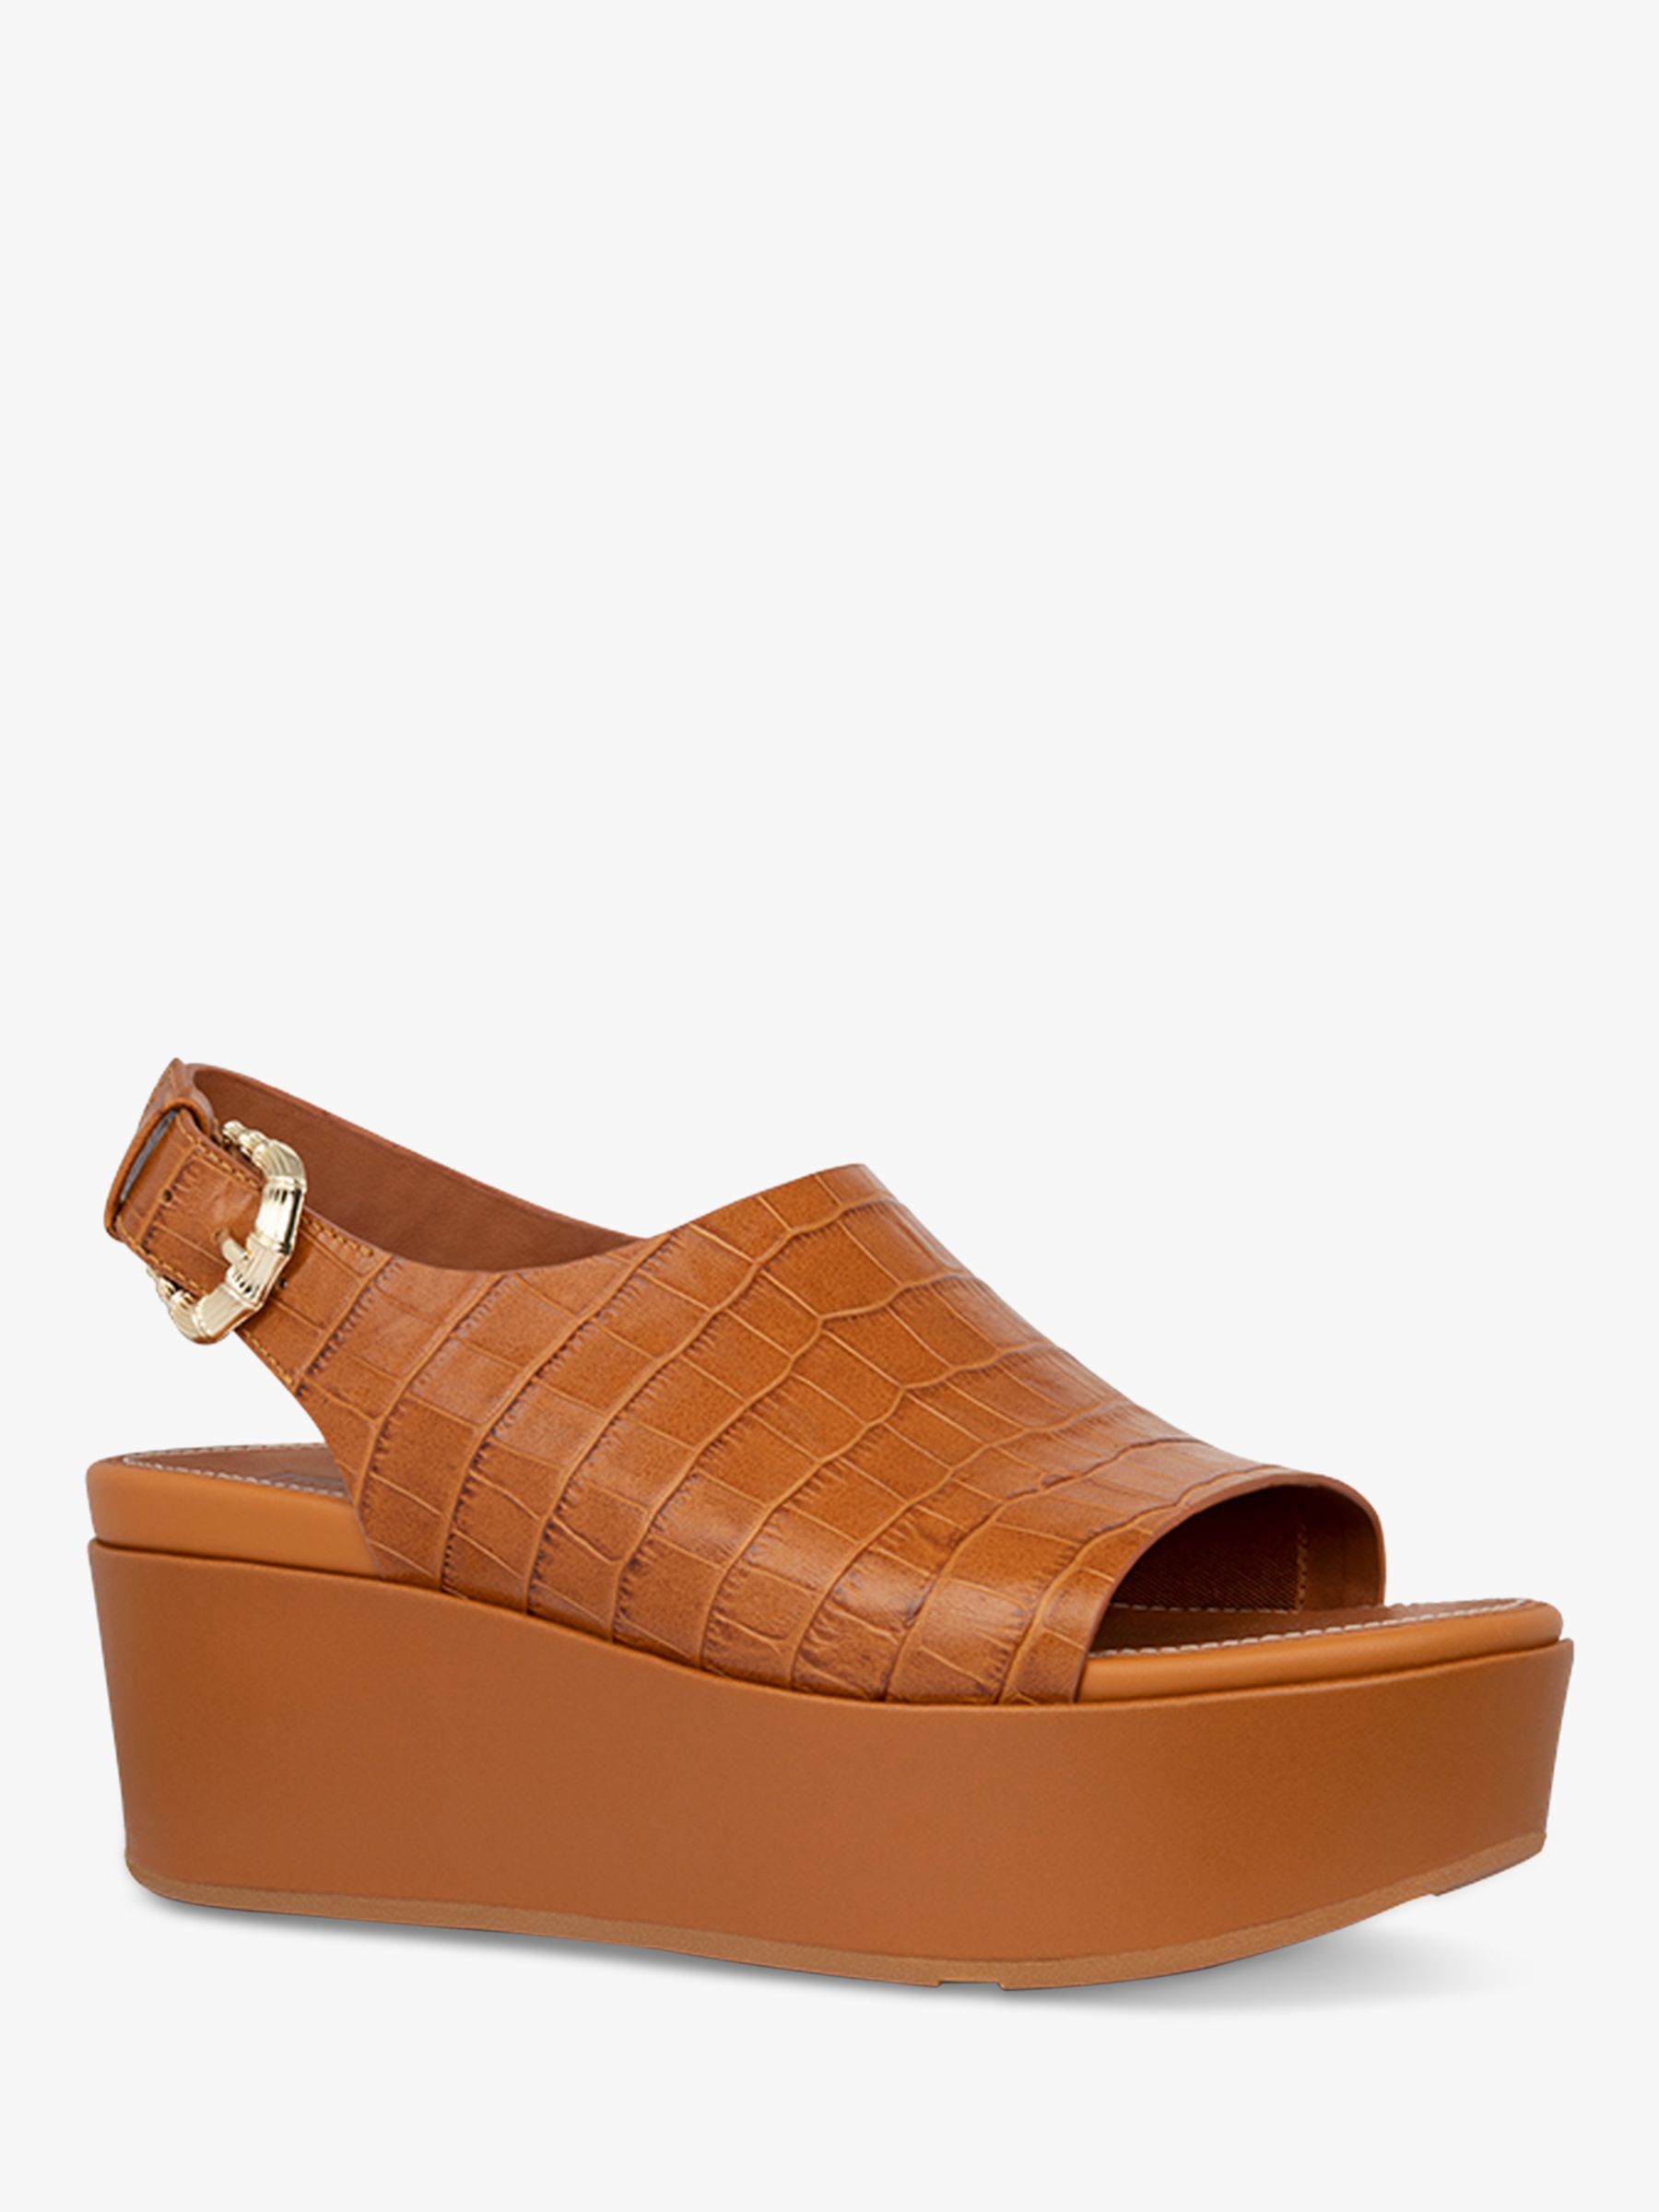 fitflop wedge sandals